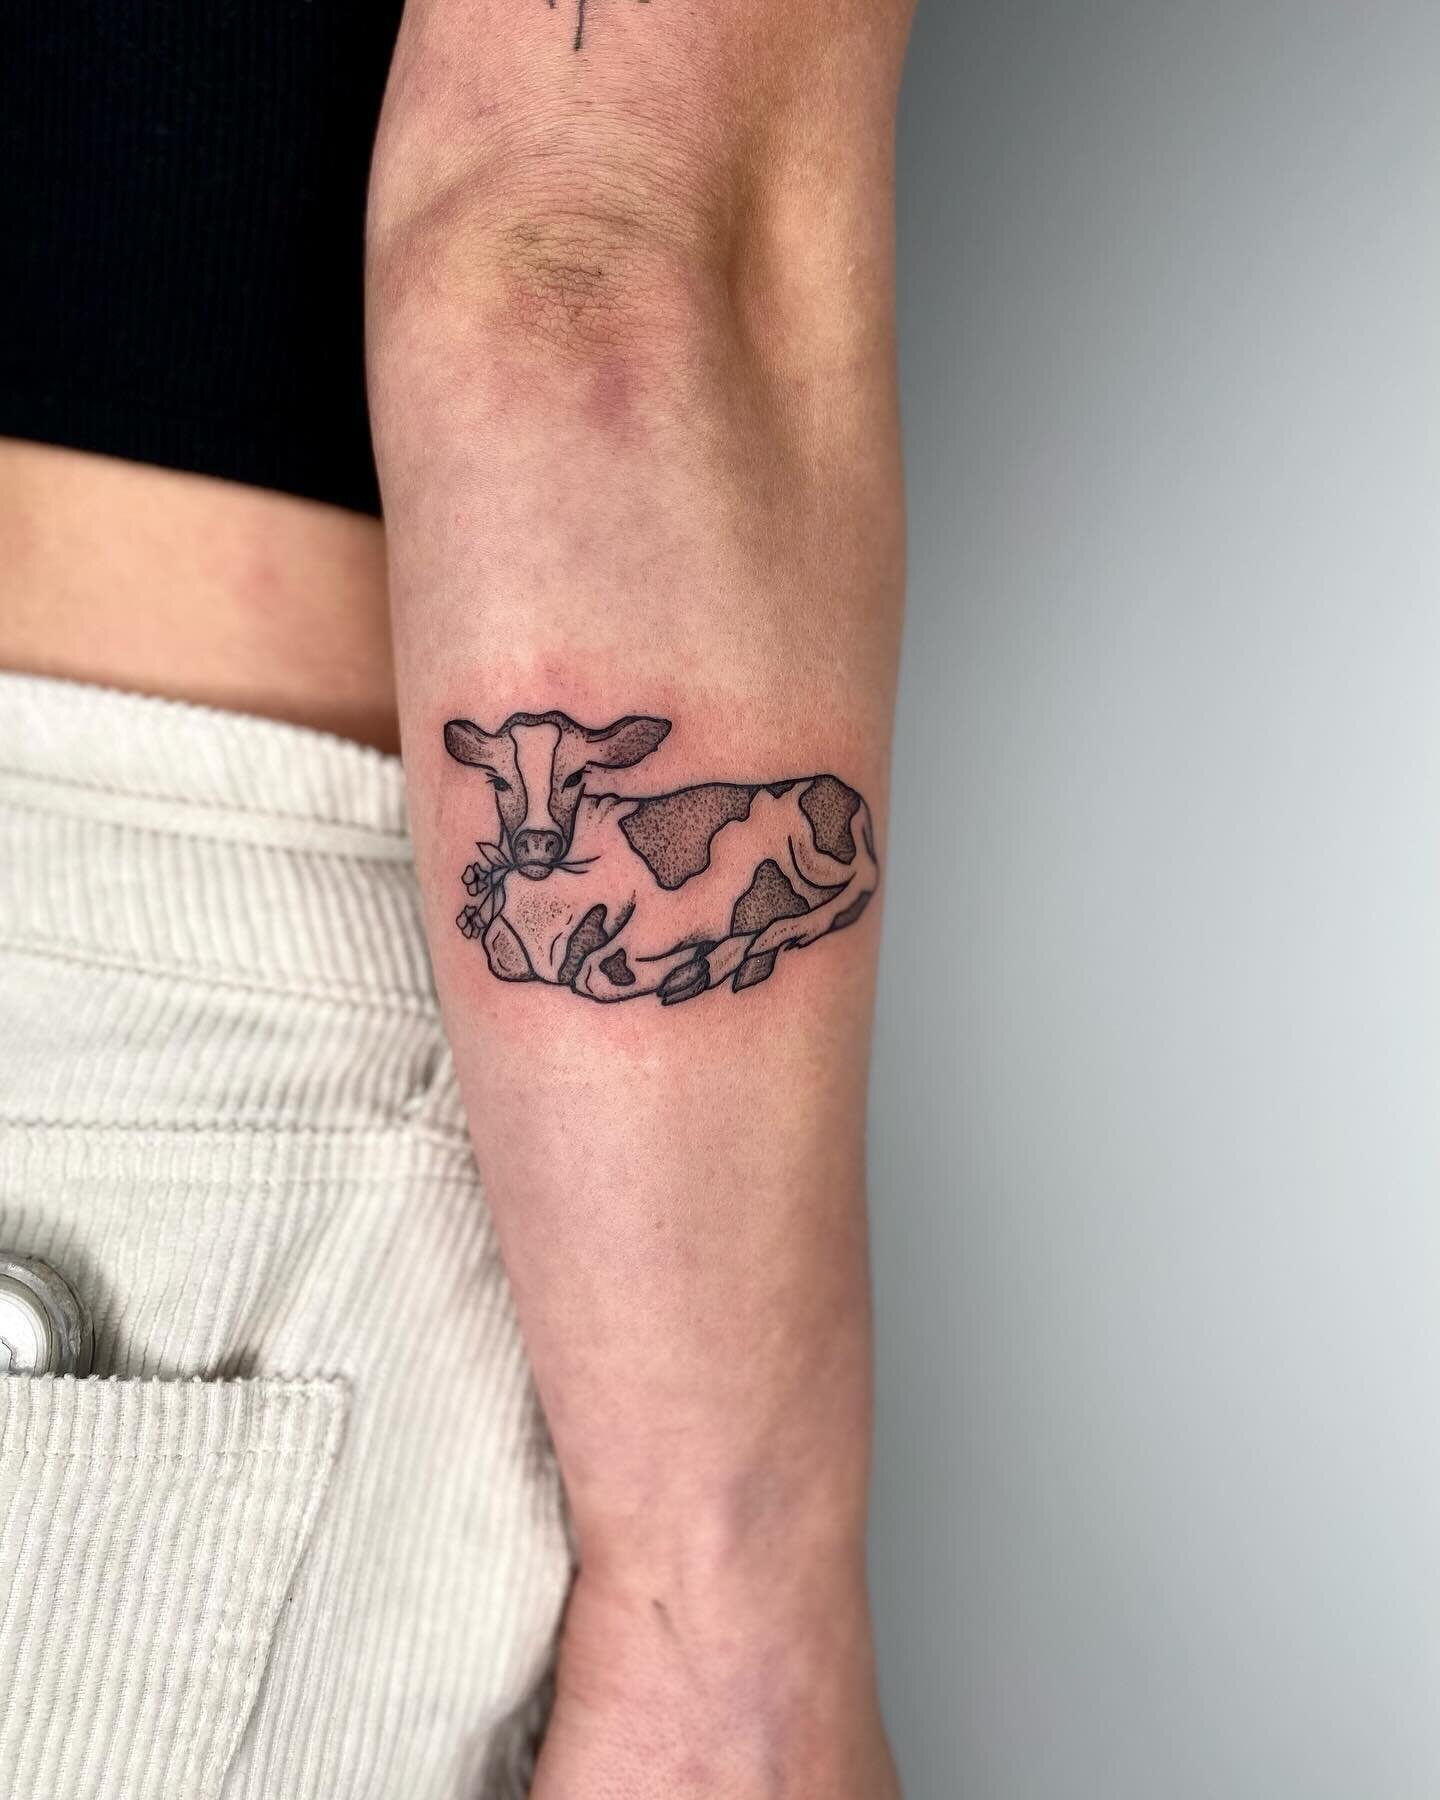 bb cow and cow shoe with the wild roses for another alberta gal🐄

makes me laugh how everytime i everytime i meet someone from calgary no matter what it turns out we probably either went to the same school or neighbouring schools or have a sibling t